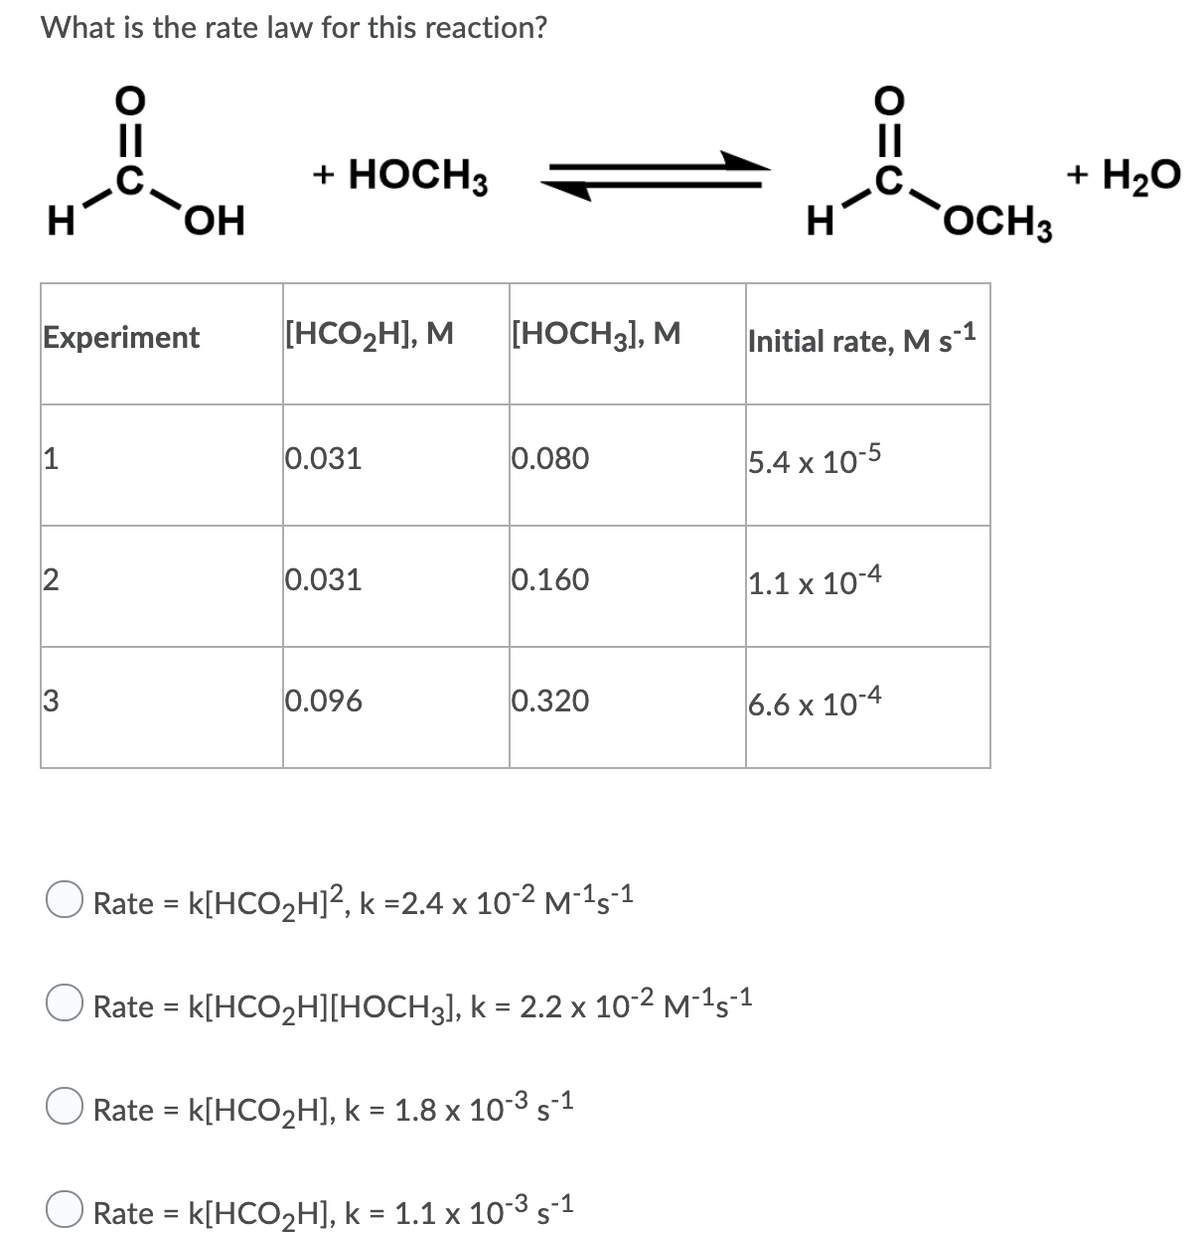 What is the rate law for this reaction?
II
II
.C.
HO,
+ HOCH3
+ H20
H
OCH3
Experiment
[HCO2H], M
[HOCH3], M
Initial rate, M s-1
1
0.031
0.080
5.4 x 10-5
0.031
0.160
1.1 x 10-4
3
0.096
0.320
6.6 x 10-4
O Rate = k[HCO2H]², k =2.4 x 10-2 M-1s-1
%3D
Rate = k[HCO2H][HOCH3], k = 2.2 x 10-2 M-1s-1
%3D
Rate = k[HCO2H], k = 1.8 x 103 s-1
%3D
Rate = k[HCO2H], k = 1.1 x 10-3 s°1
